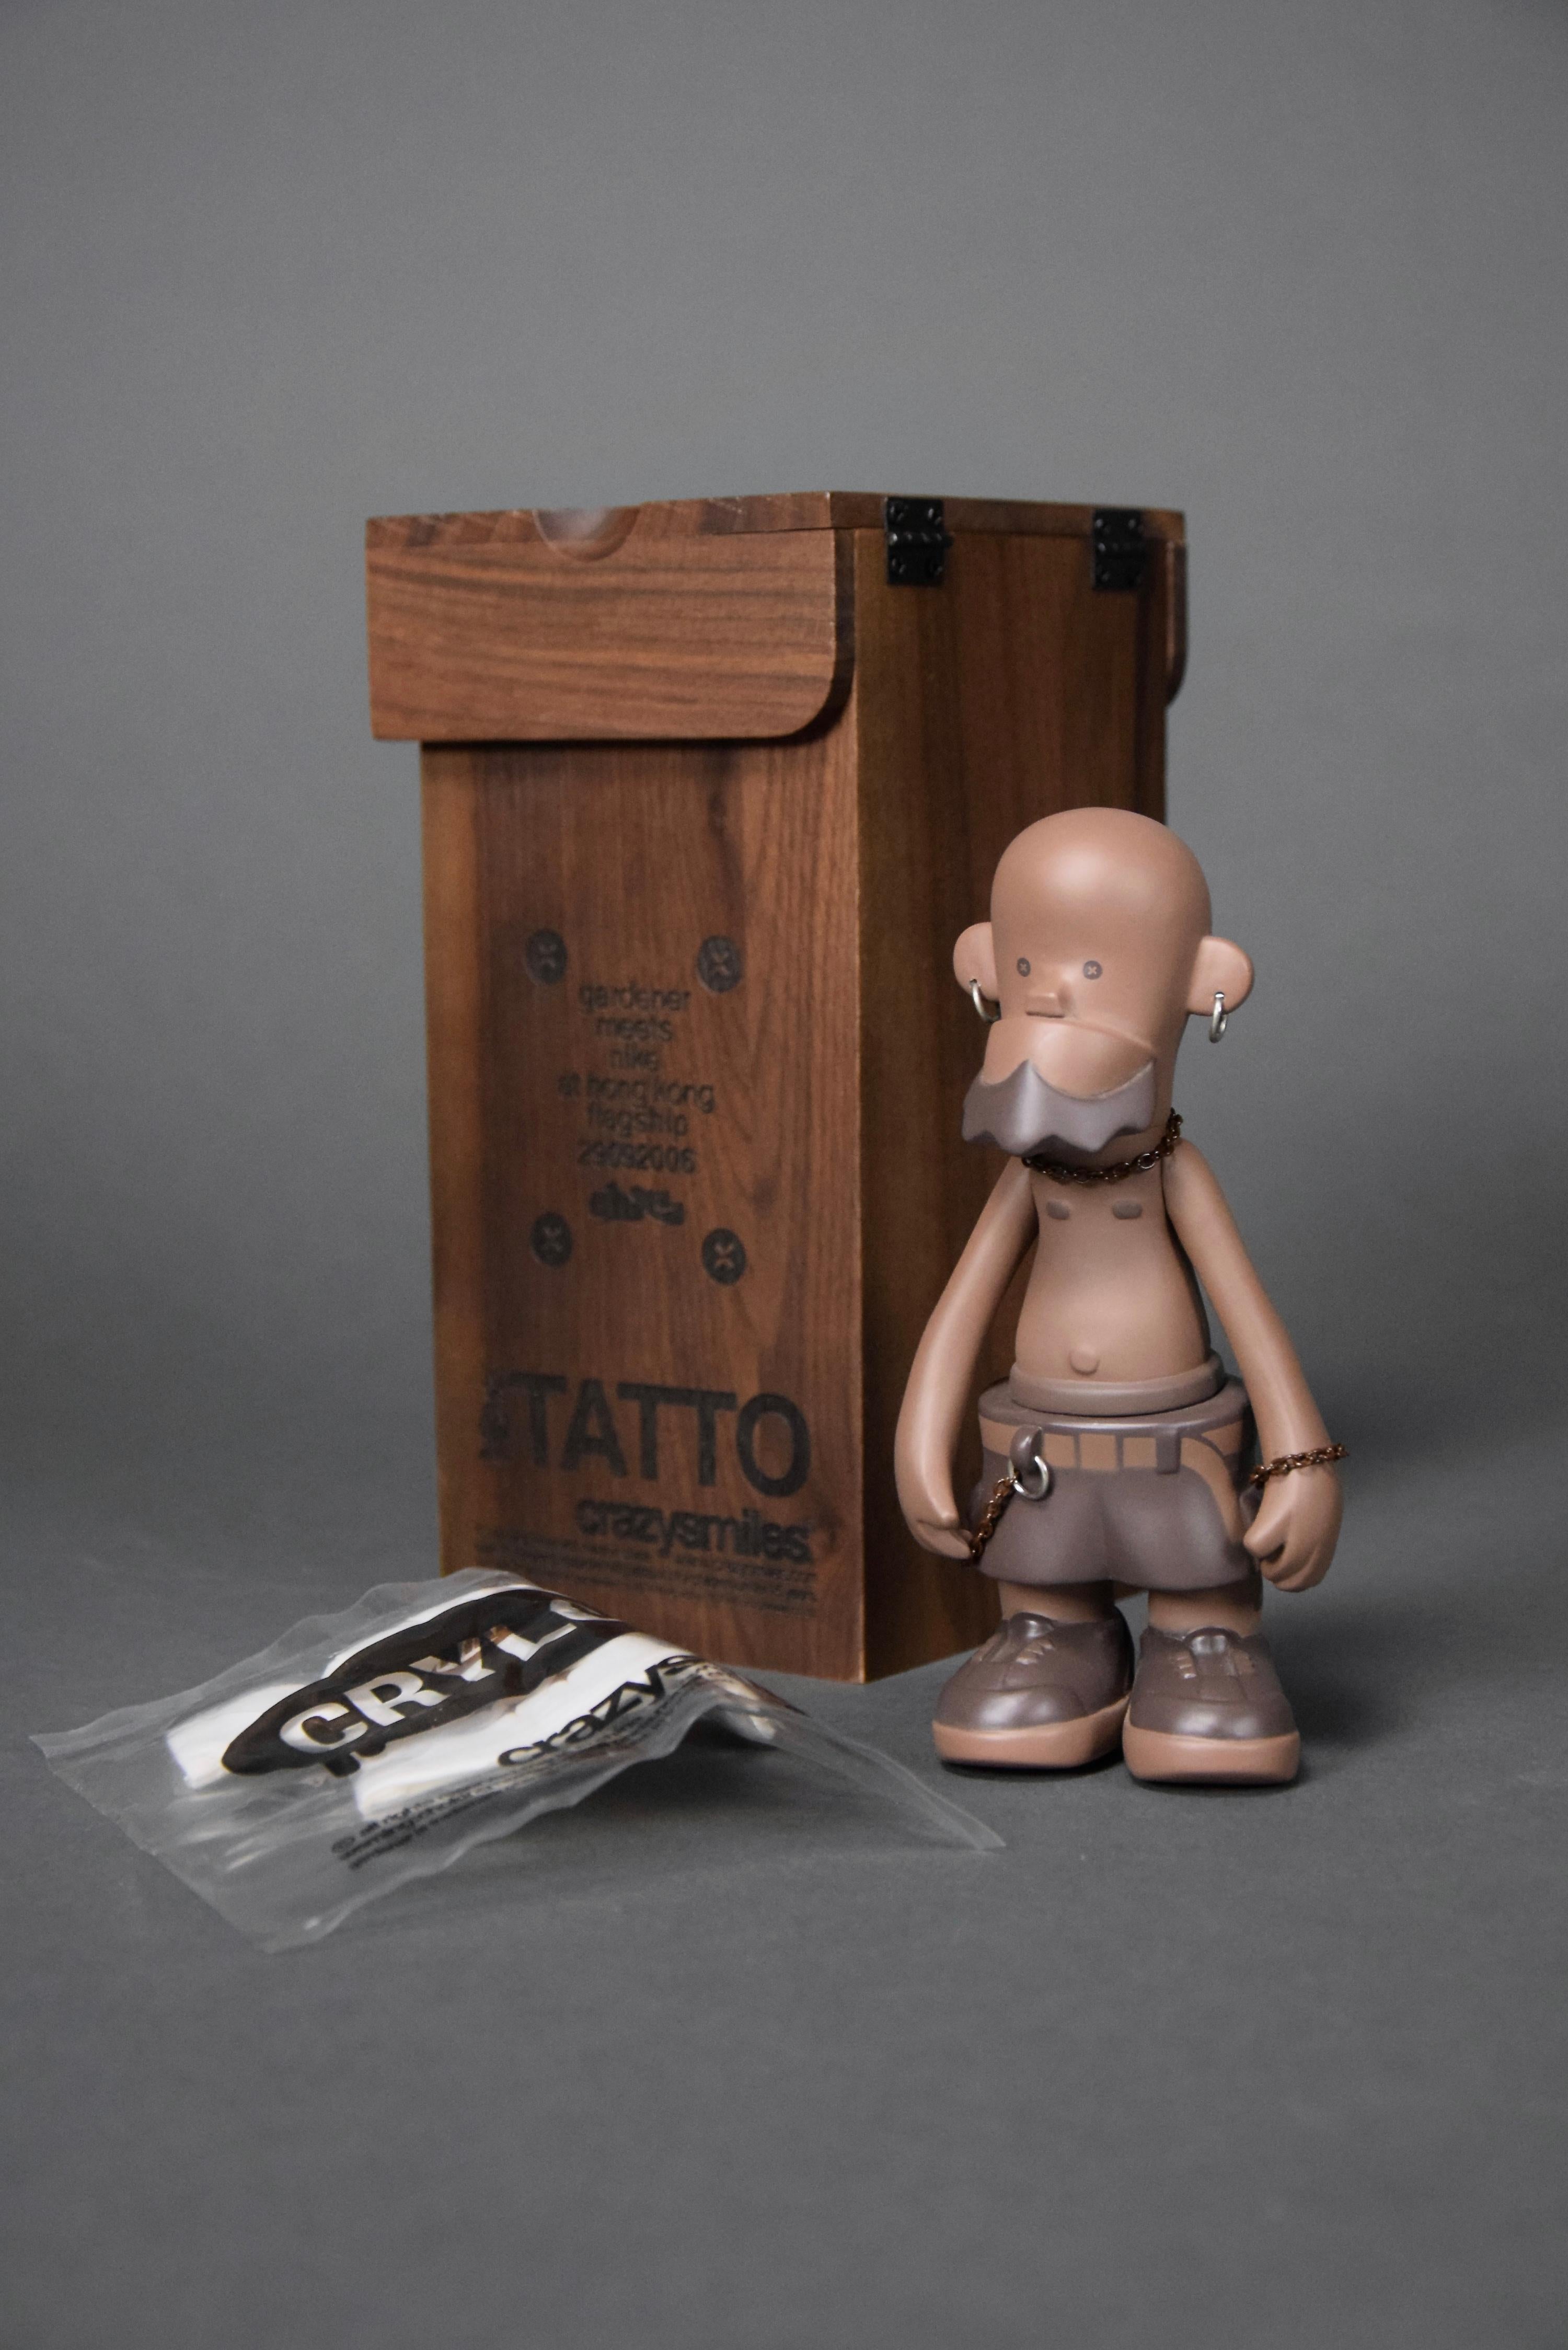 Tatto Limited Edition Gardener Meets NIKE 2006 Designer Toy In Good Condition For Sale In Weesp, NL